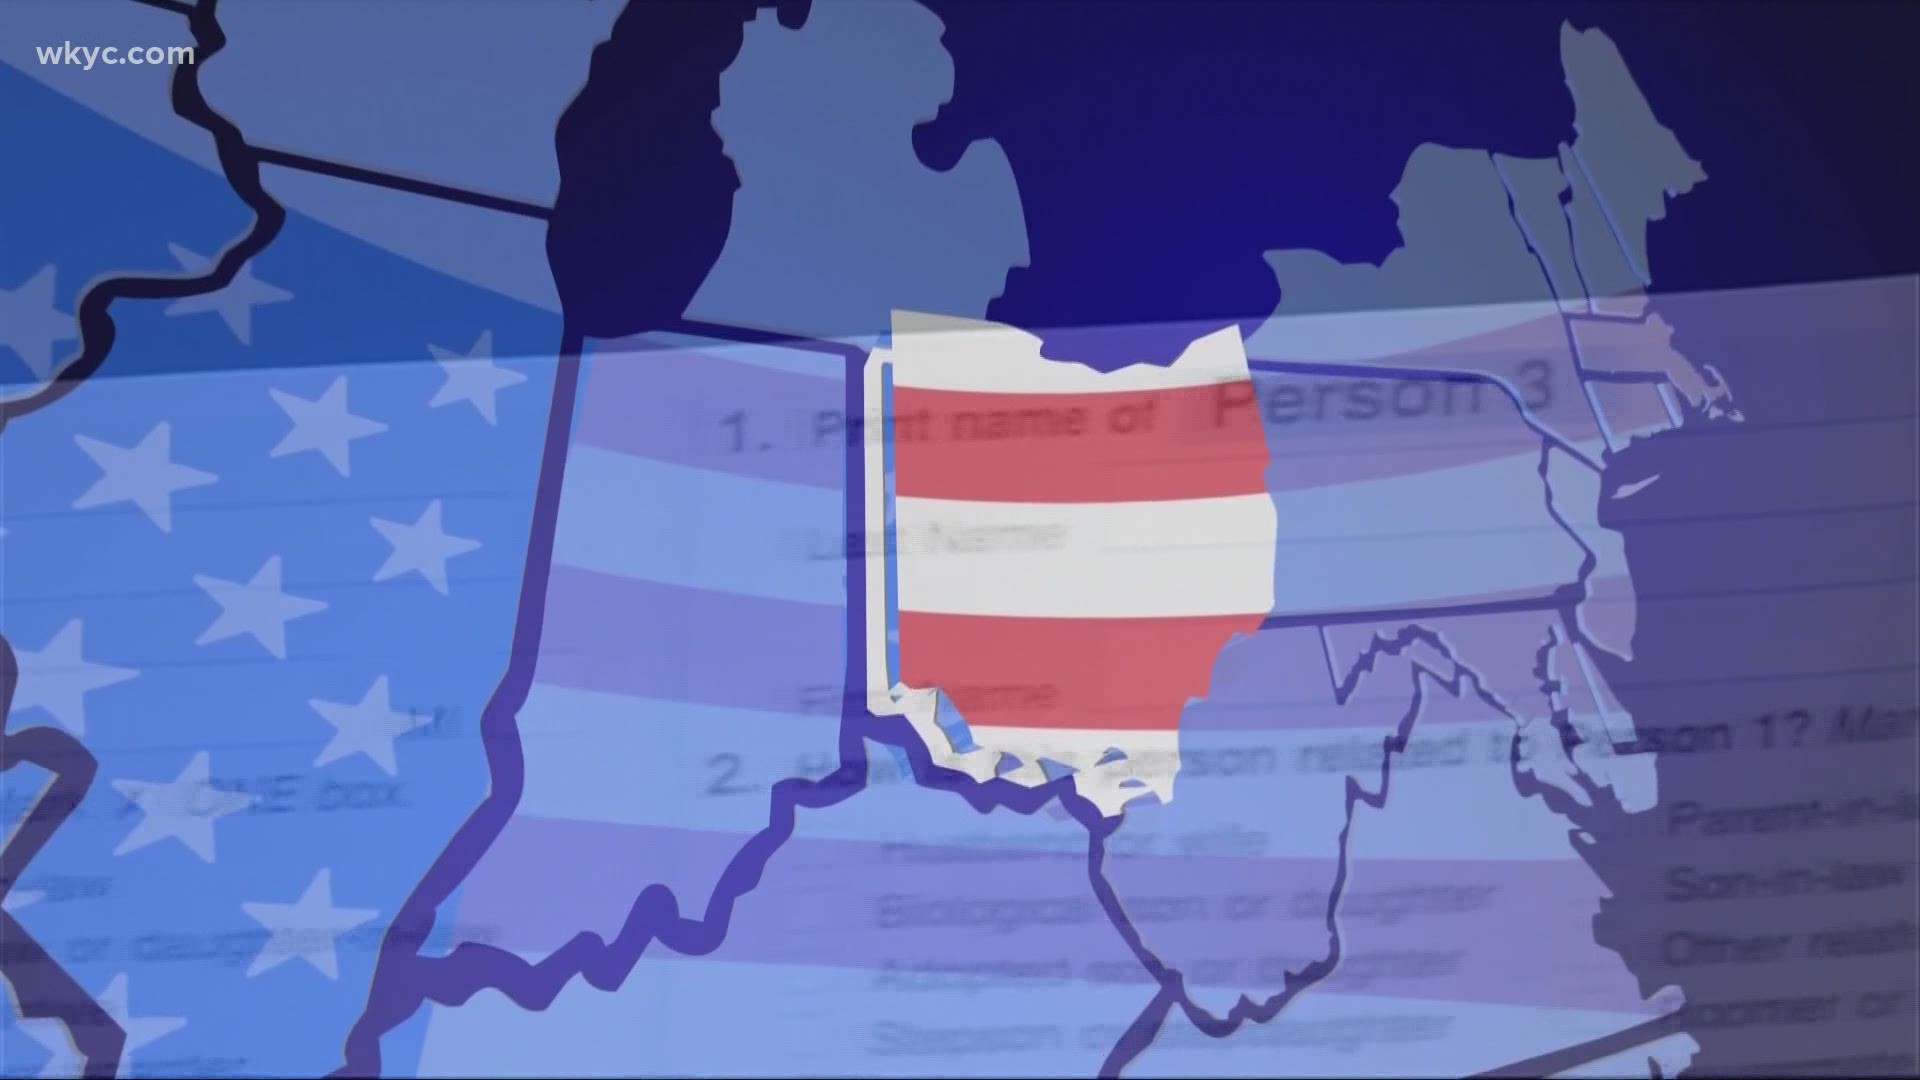 Ohio will lose one seat in the U.S. House of Representatives following data being released from the U.S. Census conducted in 2020. Laura Caso has more.